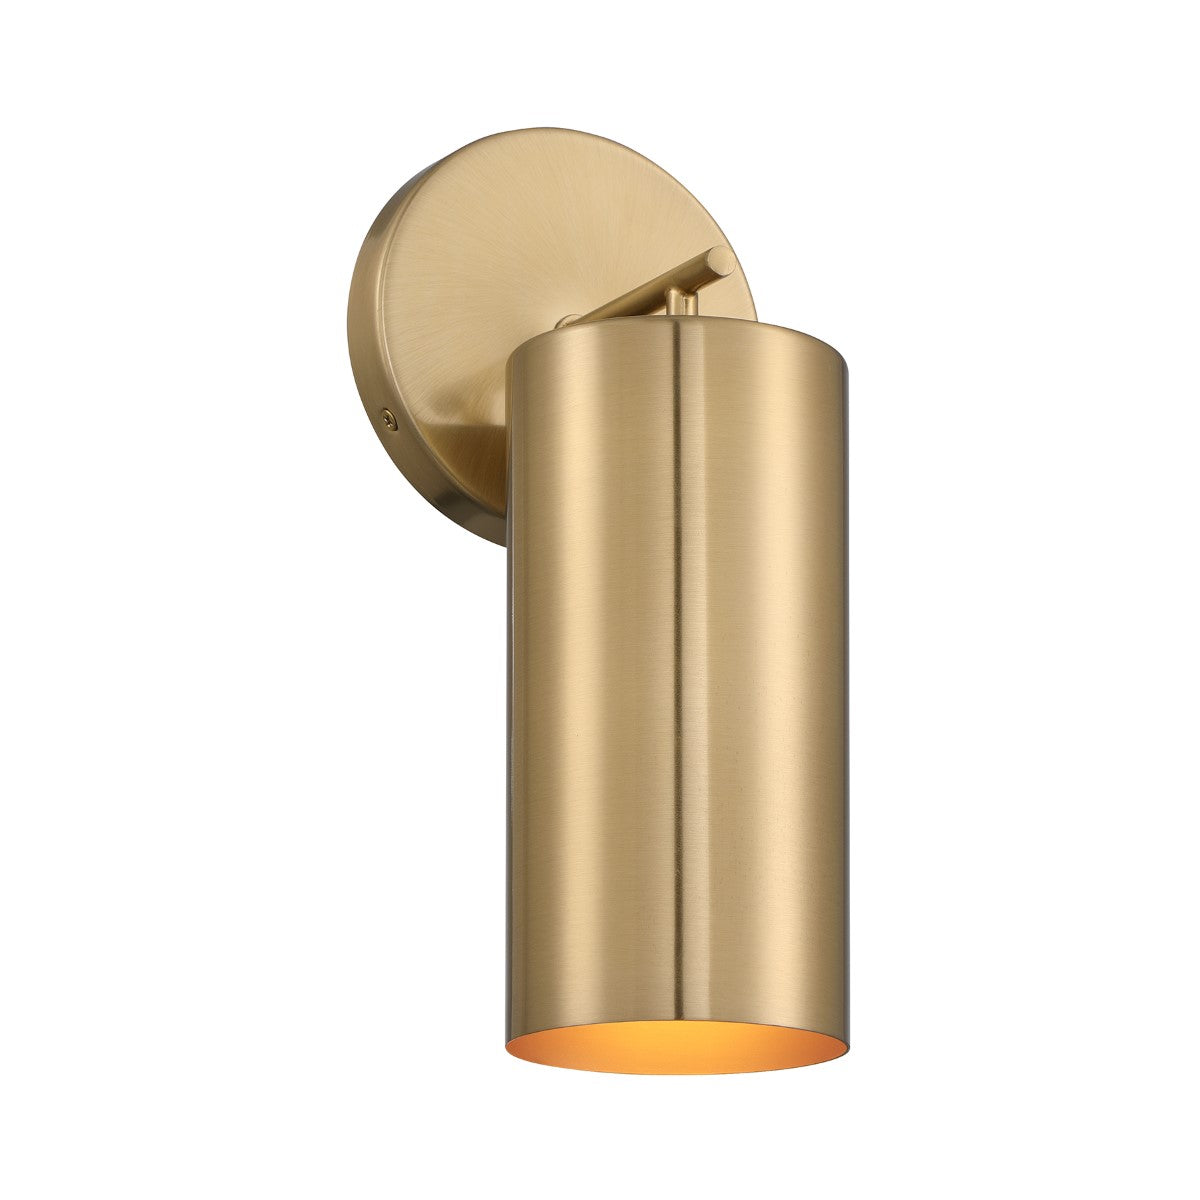 Lio 12 in. Armed Sconce Noble Brass Finish